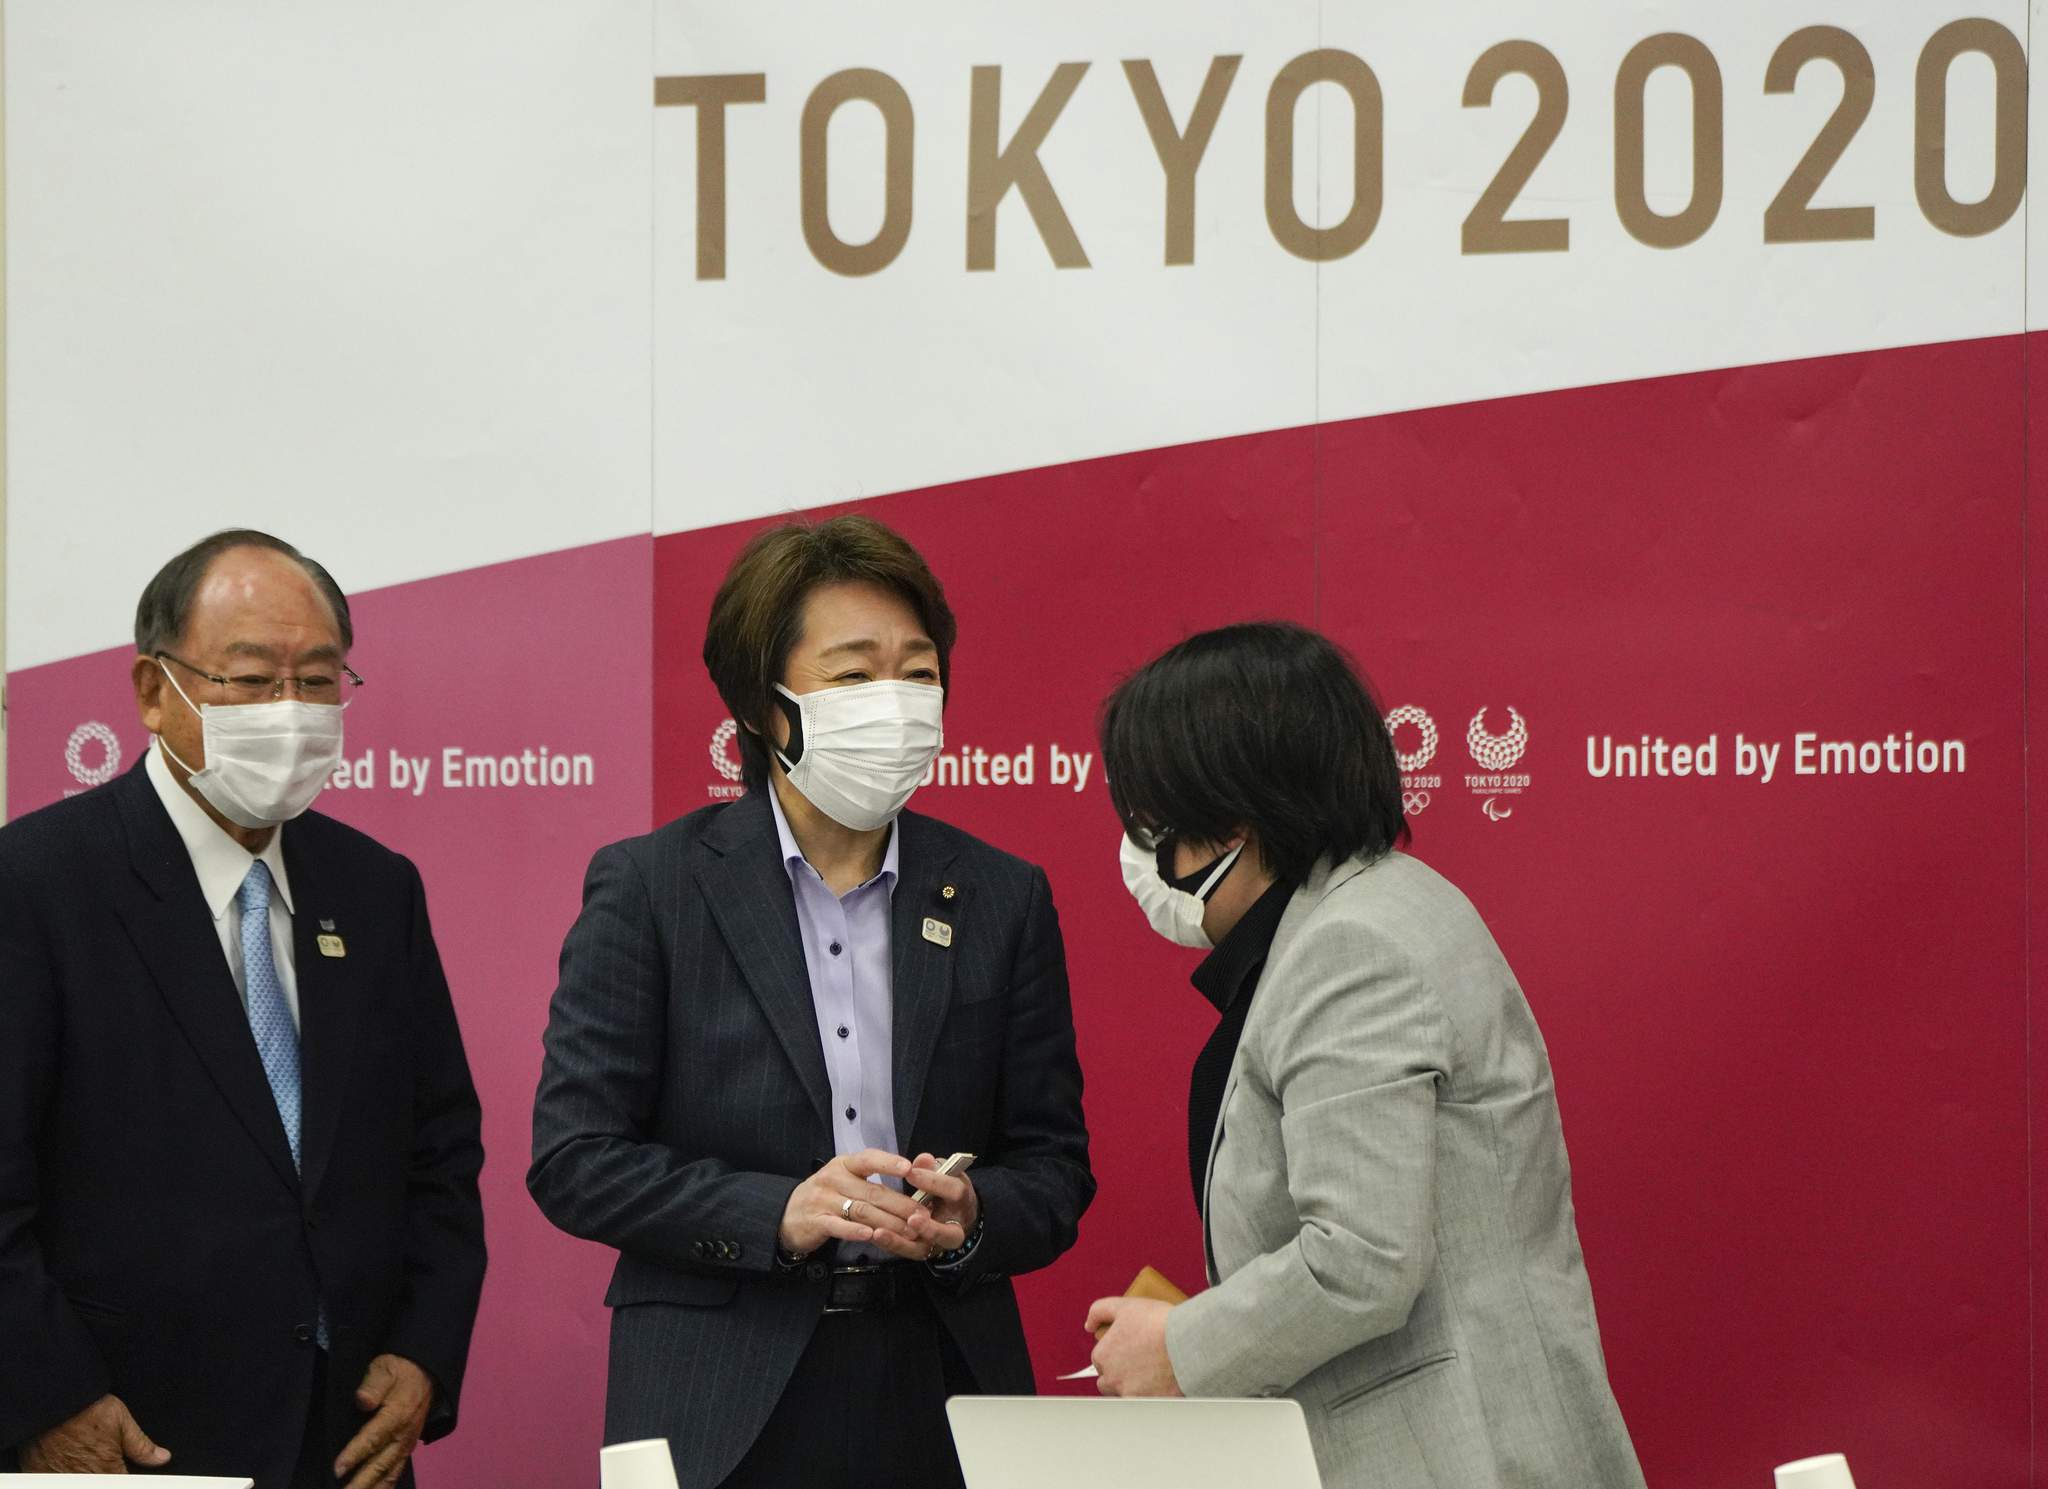 Volunteers from abroad ruled out for Tokyo Olympics